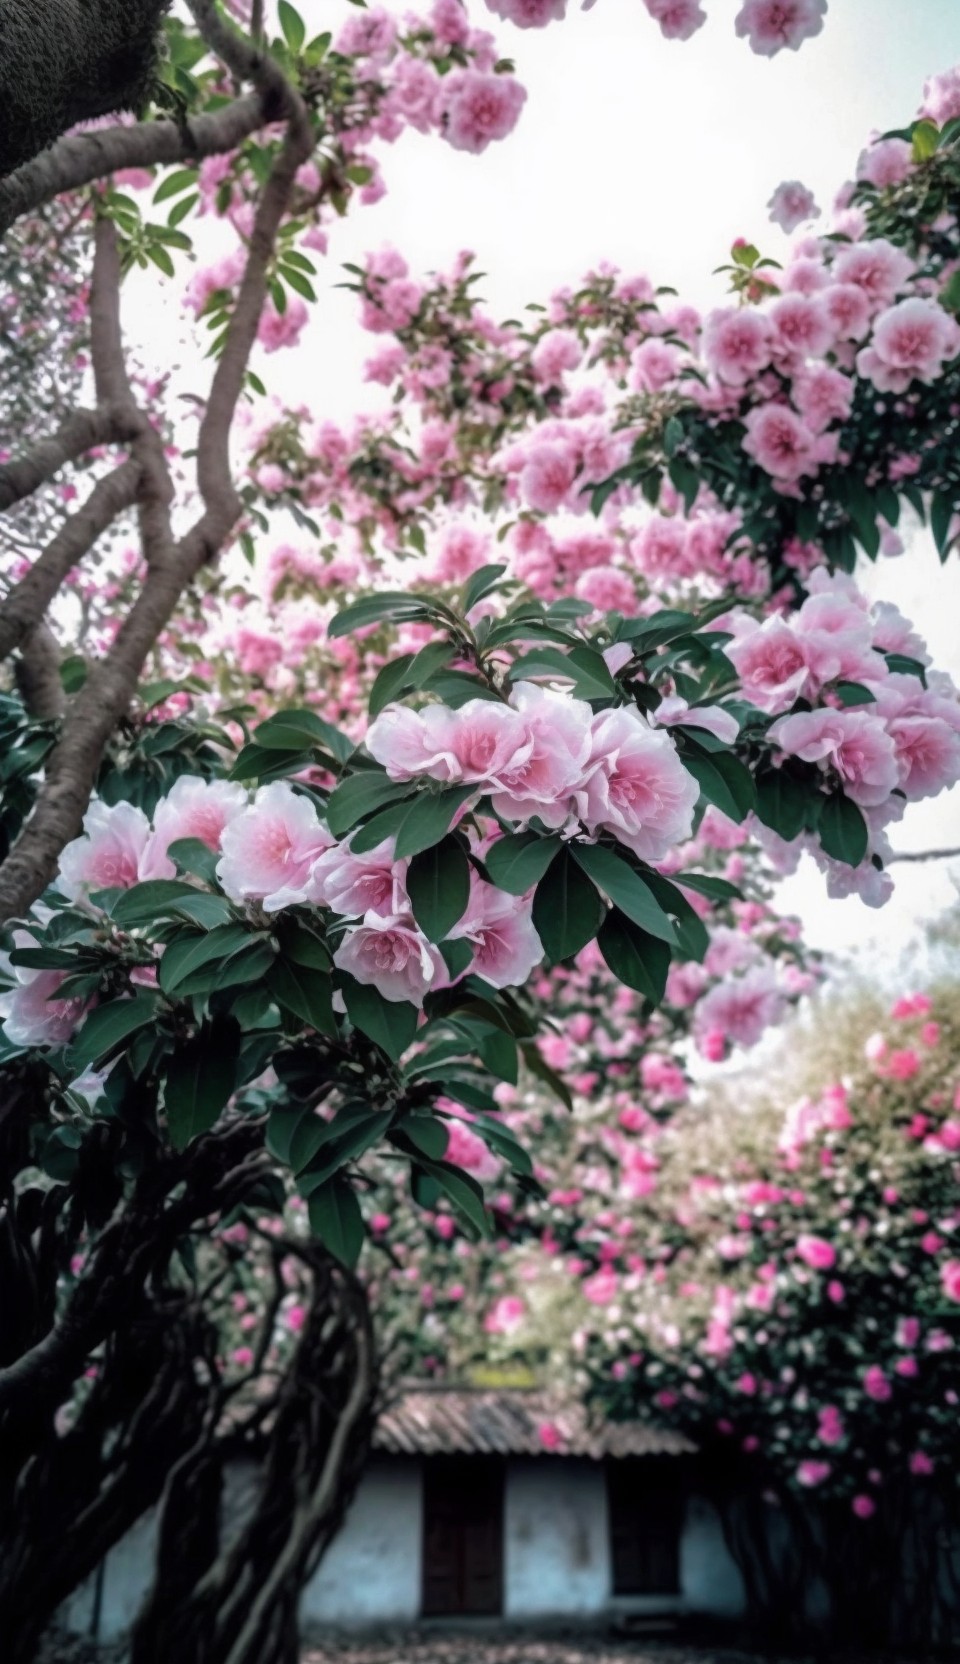 7 images of blooming camellia by Midjourney